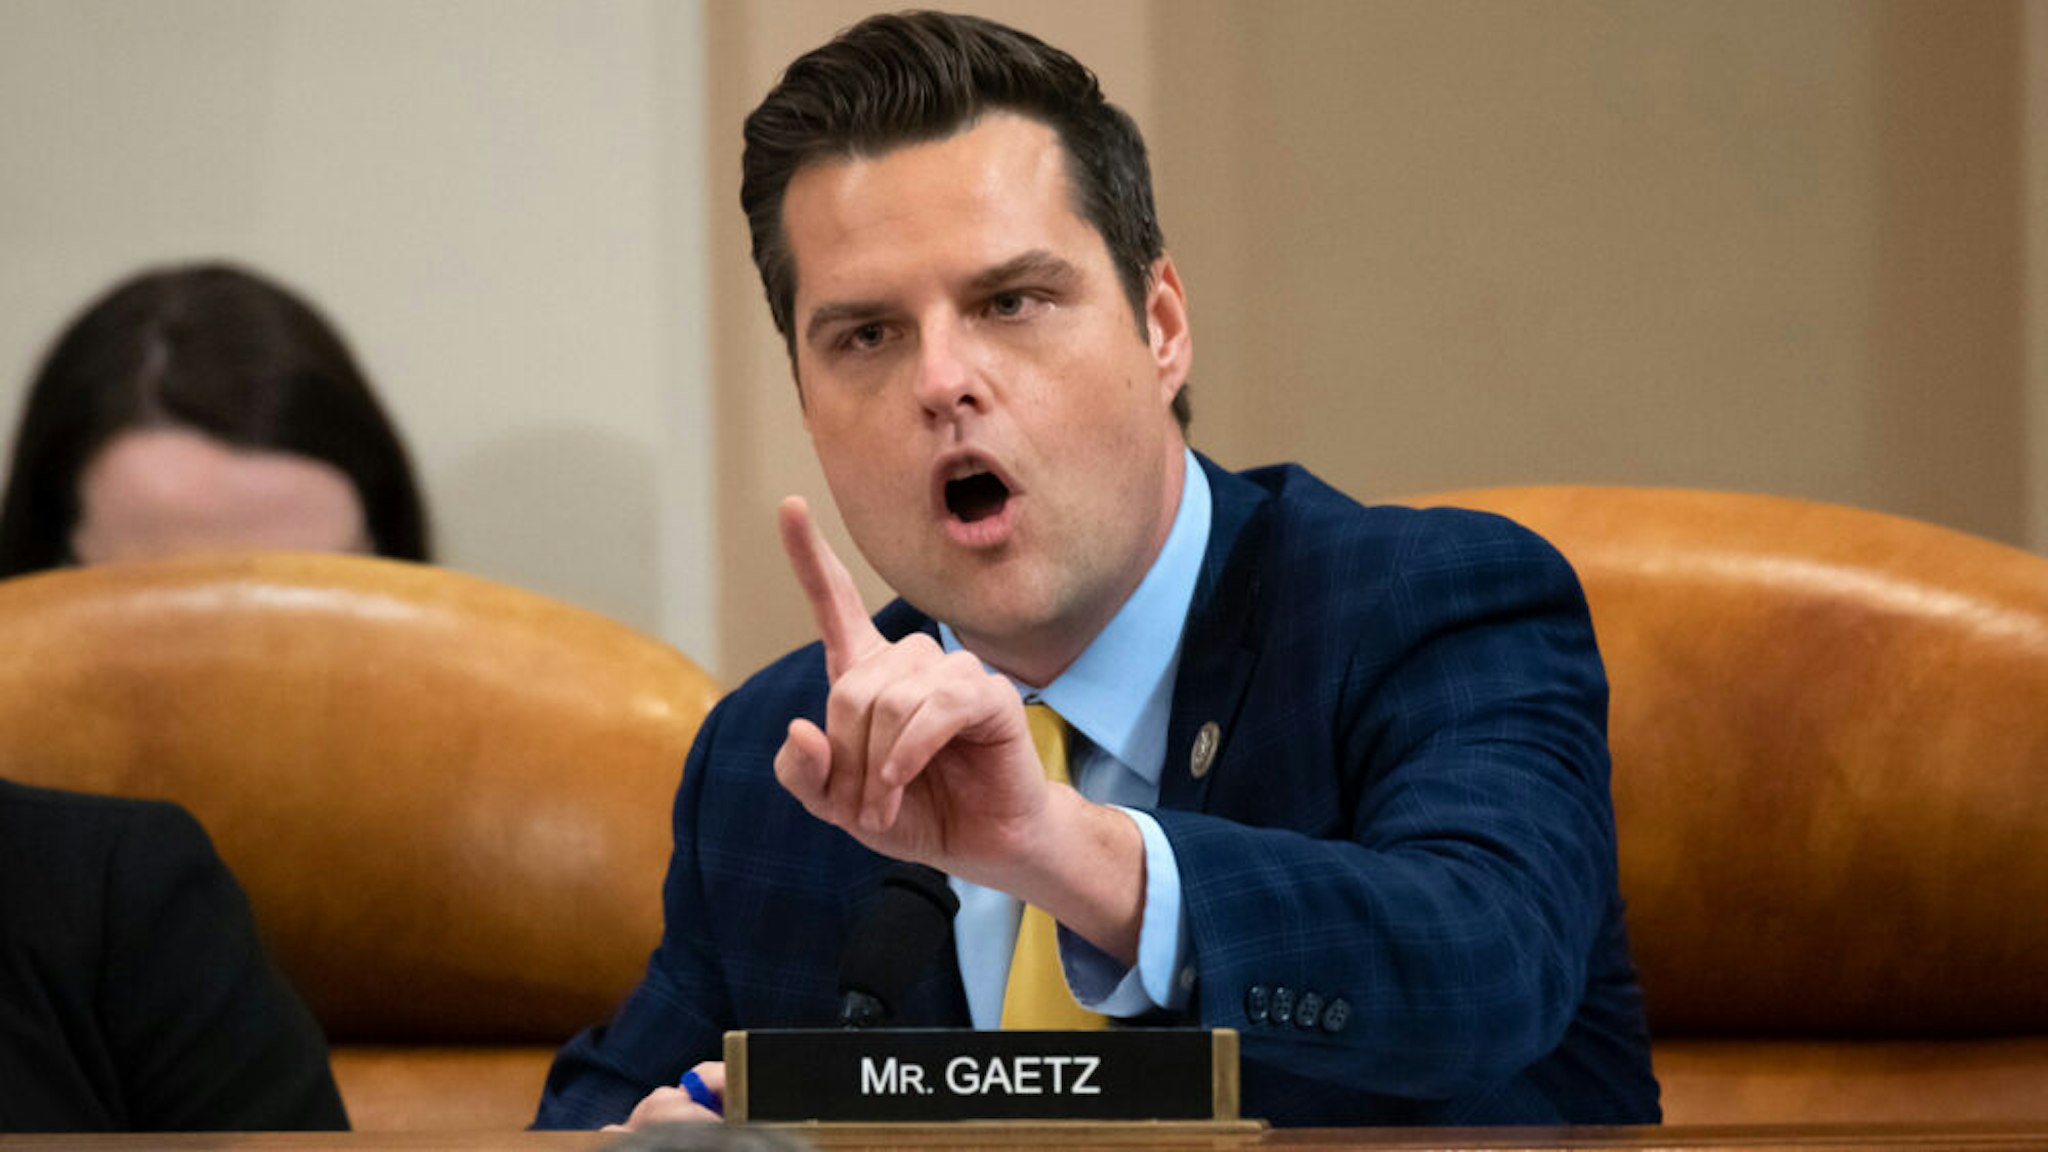 WASHINGTON, DC – DECEMBER 4: Rep. Matt Gaetz (R-FL) speaks during testimony by constitutional scholars before the House Judiciary Committee in the Longworth House Office Building on Capitol Hill December 4, 2019 in Washington, DC. This is the first hearing held by the Judiciary Committee in the impeachment inquiry against U.S. President Donald Trump, whom House Democrats say held back military aid for Ukraine while demanding it investigate his political rivals. The Judiciary Committee will decide whether to draft official articles of impeachment against President Trump to be voted on by the full House of Representatives.